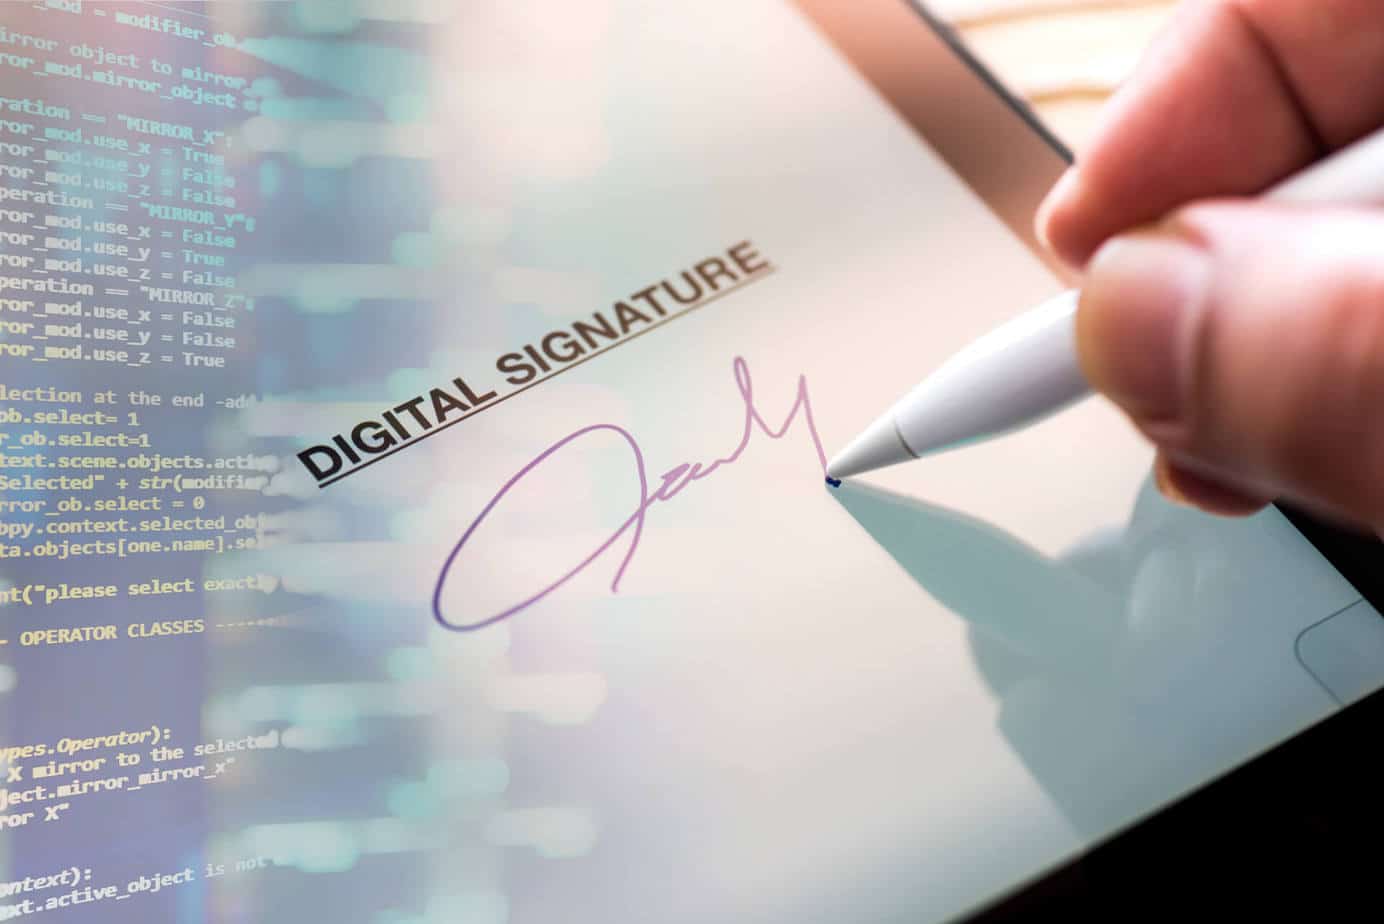 signed documents, digitally sign